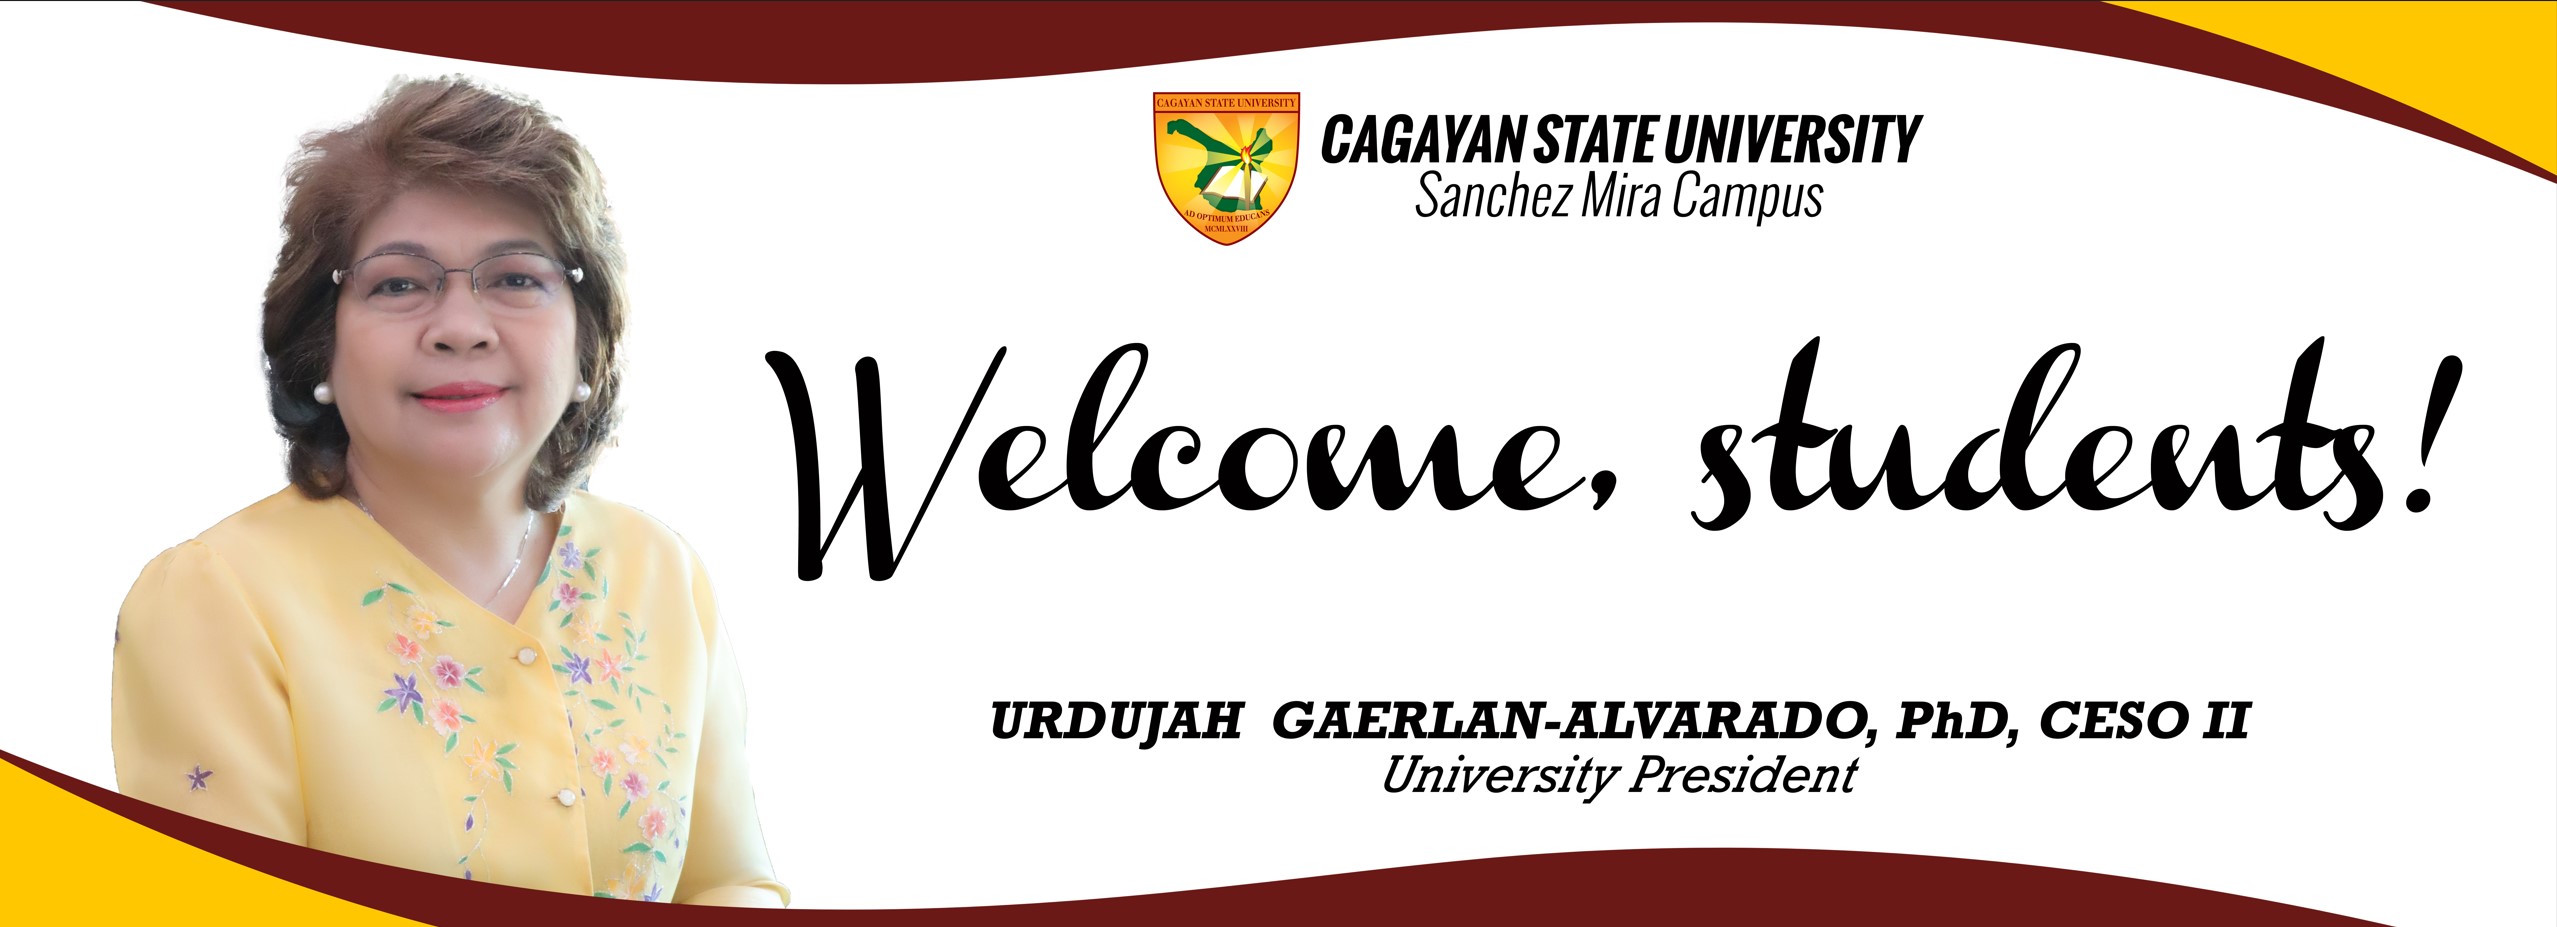 Welcome Students!